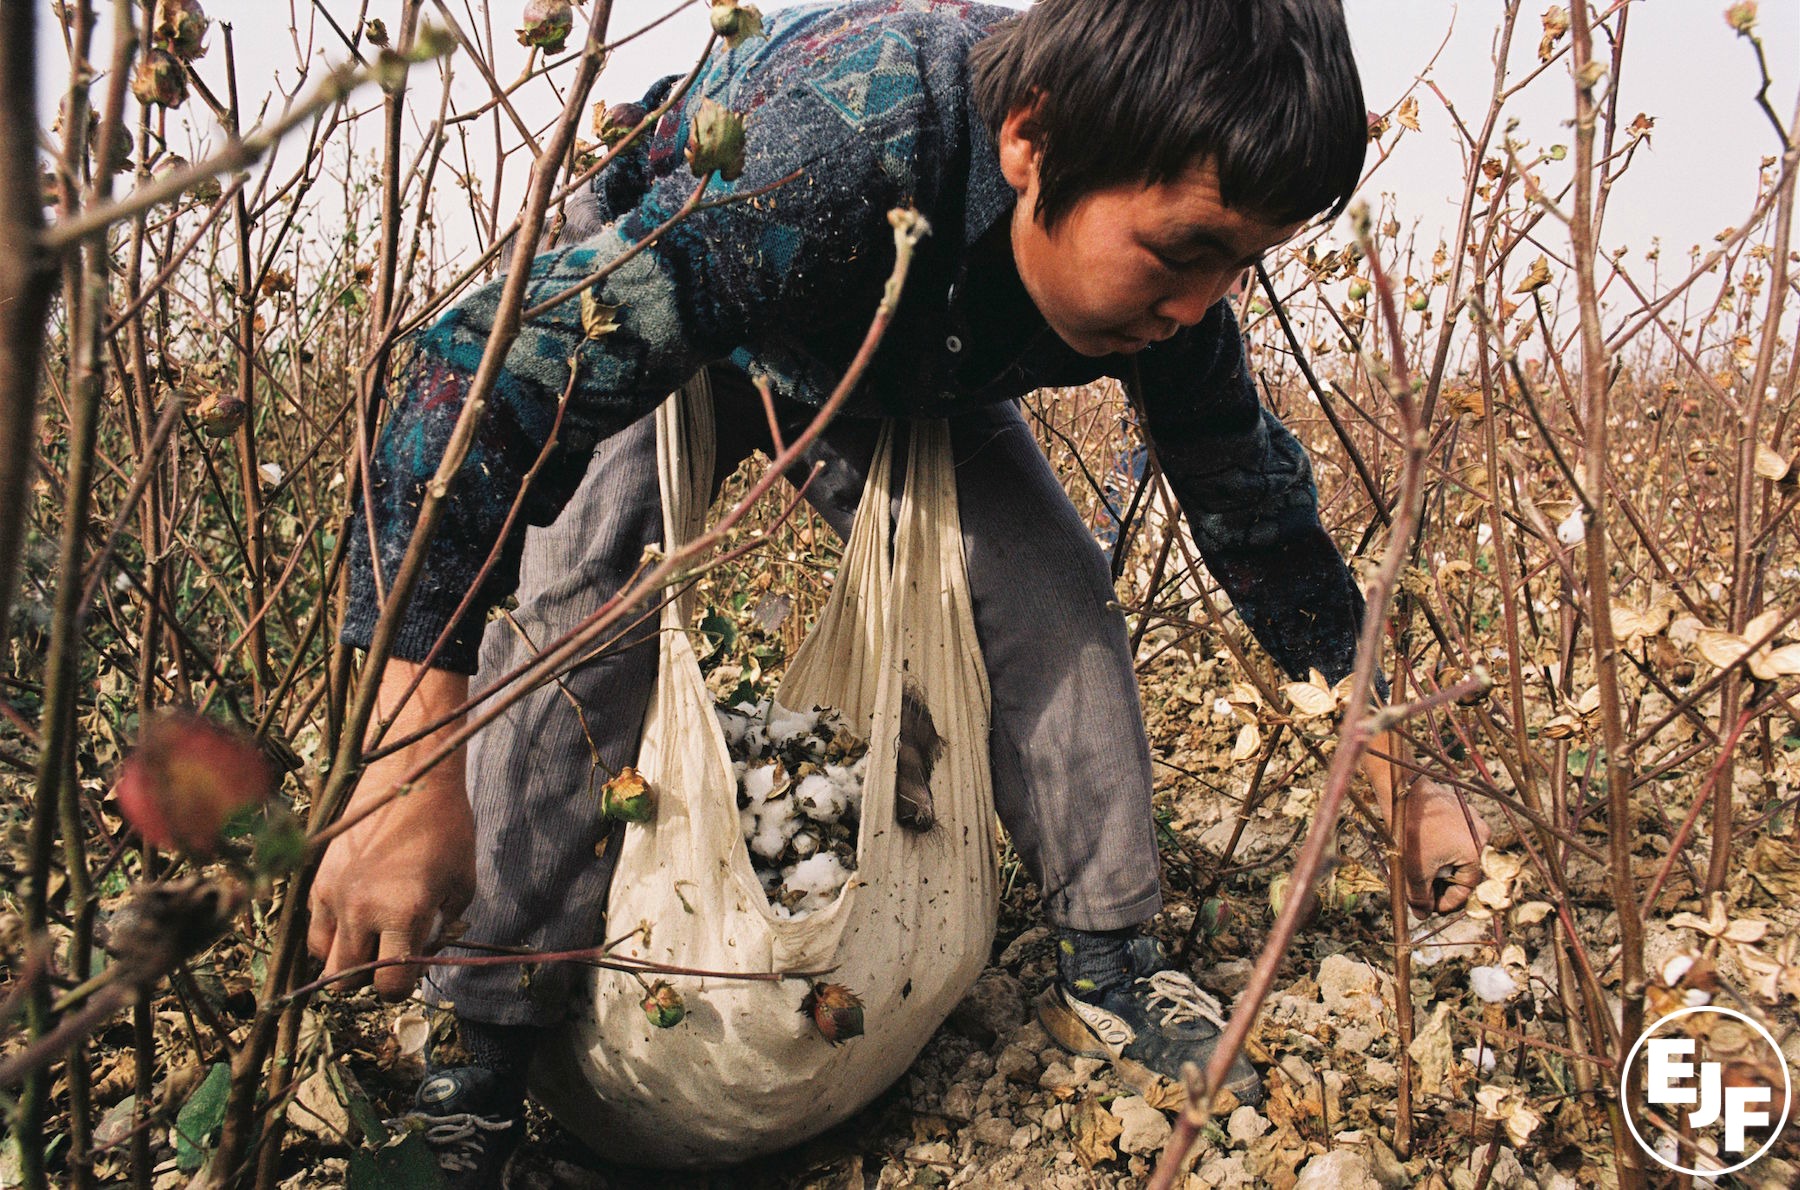 EJF invited by UK Government to discuss Uzbek cotton